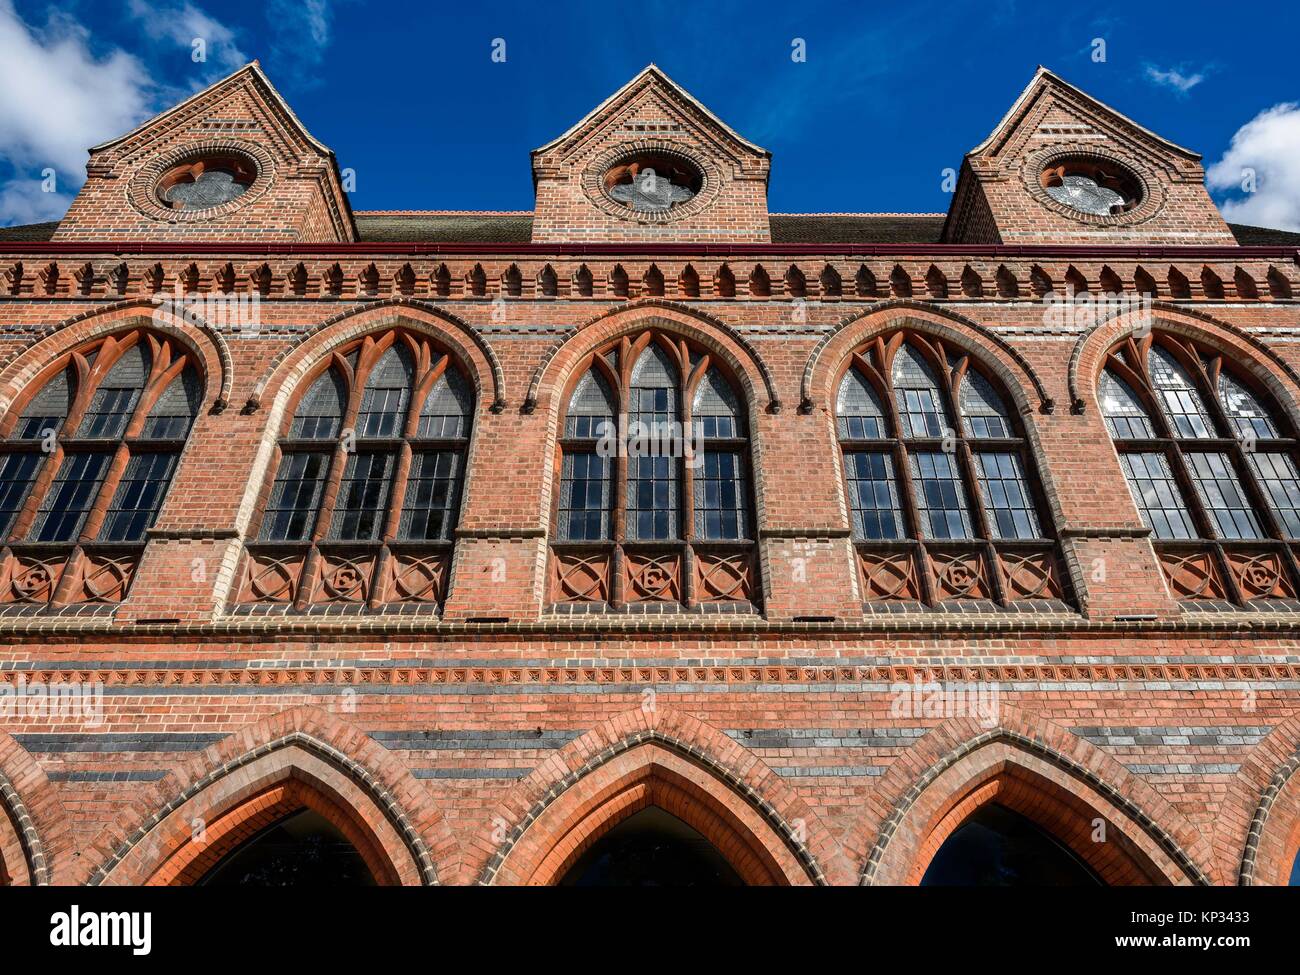 The ornate old town hall in Knutsford, now a grade II listed building, constructed in 1871 by Alfred Waterhouse who designed Manchester Town Hall and  Stock Photo